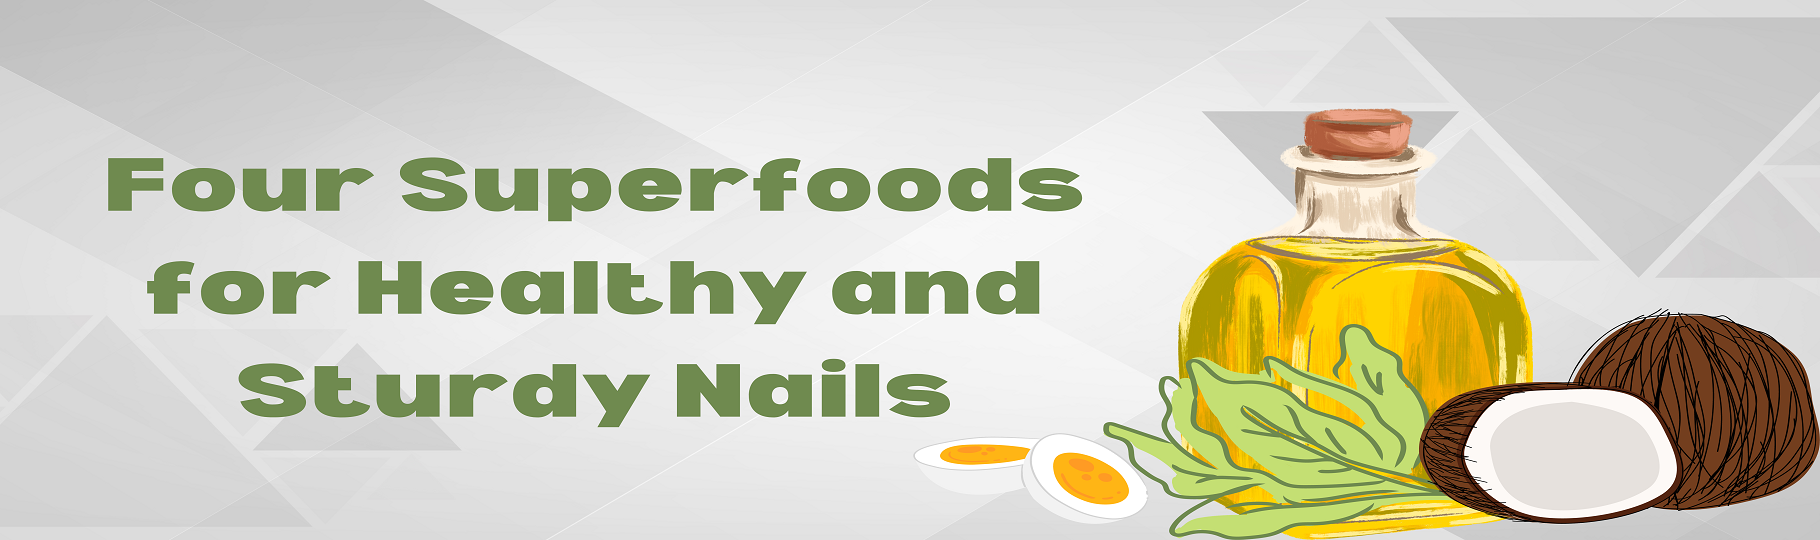 four superfoods for healthy and sturdy nails